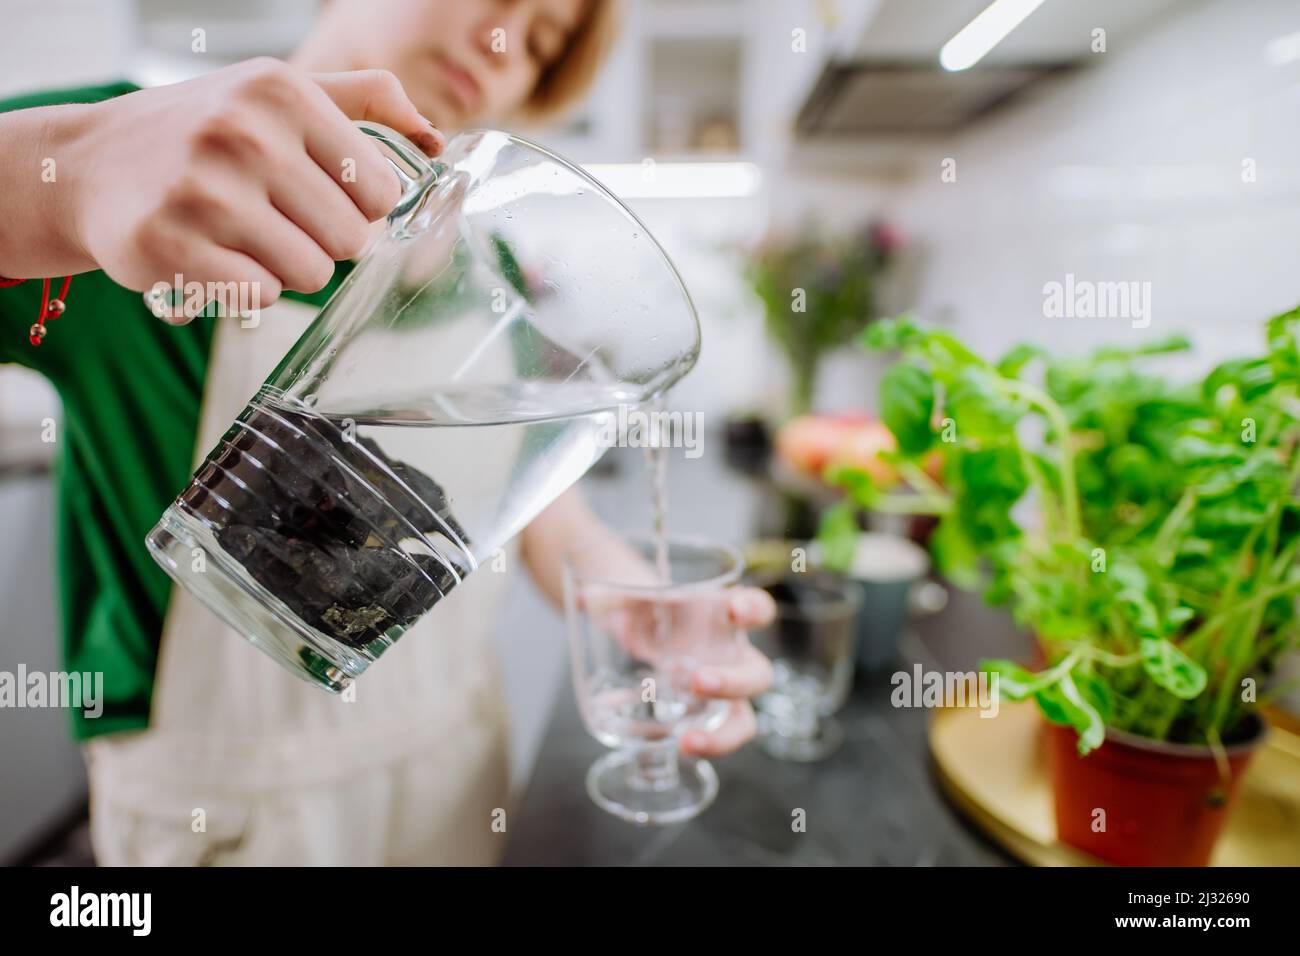 Girl pouring water from jar with shungite stones Stock Photo